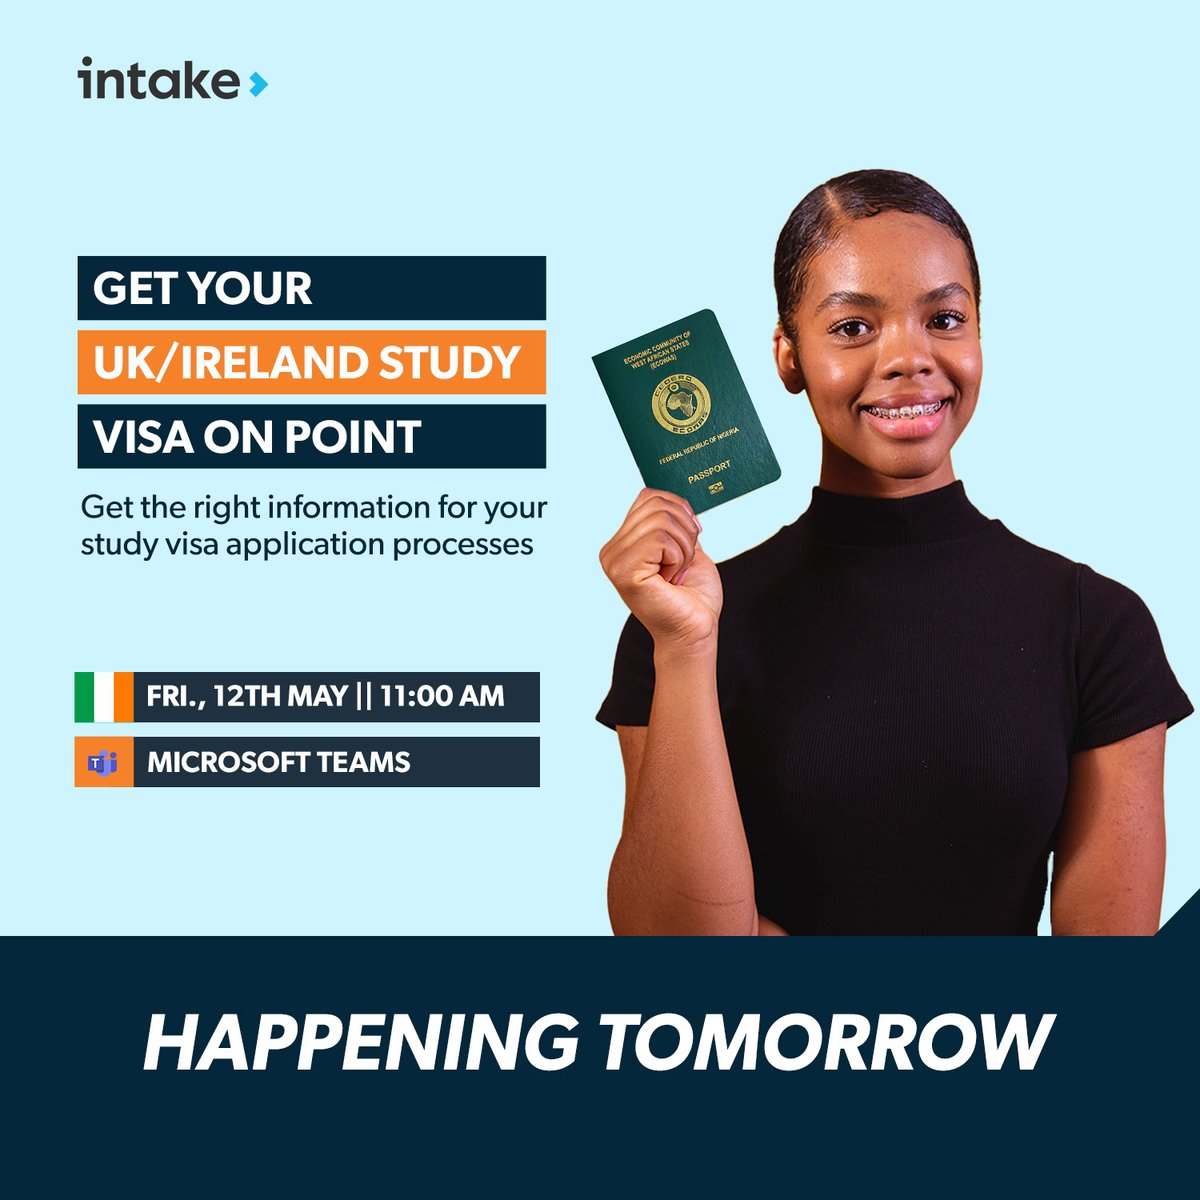 📝 Get all questions answered at the Ireland Visa Seminar.

Don't miss your chance! Click the link to register now😁
web.intake.education/gh/events/even…

#Intakegh #WhateverItTakes #webinar #intakewebinar #visaapplication #visa #visaprocess #visaapproval #studyabroad #StudyInIreland